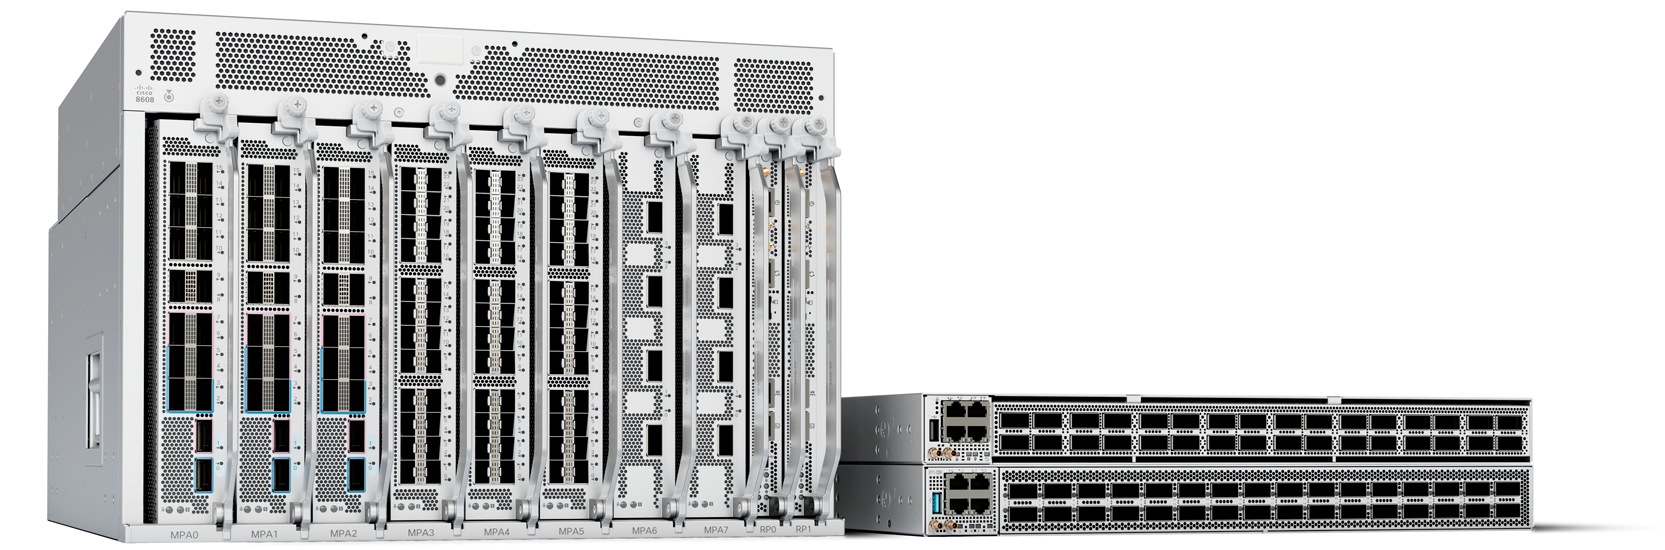 Image of the Cisco 8000 Series Routers